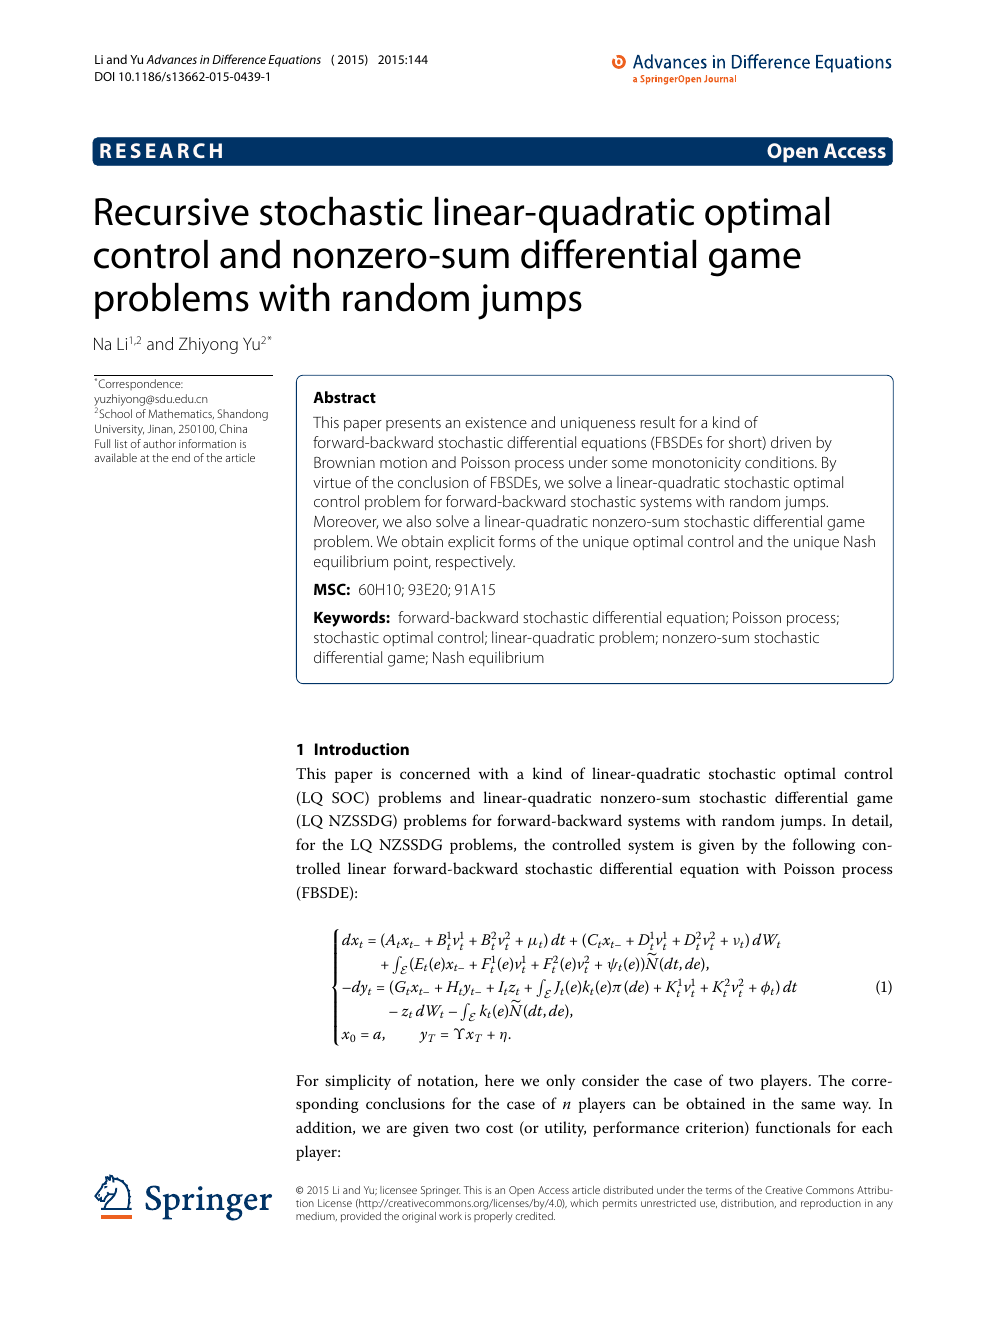 Recursive Stochastic Linear Quadratic Optimal Control And Nonzero Sum Differential Game Problems With Random Jumps Topic Of Research Paper In Mathematics Download Scholarly Article Pdf And Read For Free On Cyberleninka Open Science